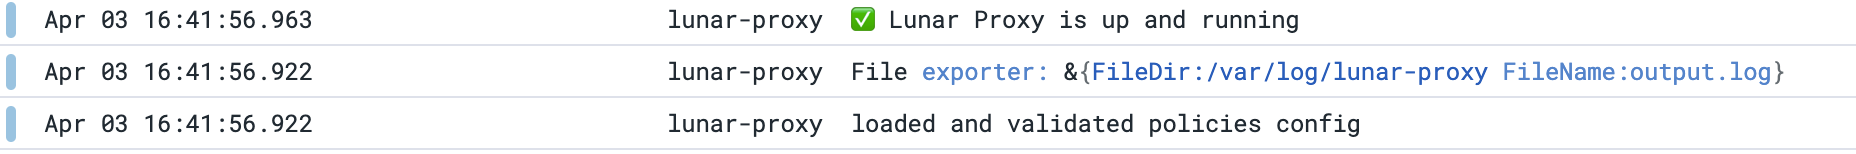 Example of logs from Lunar Proxy